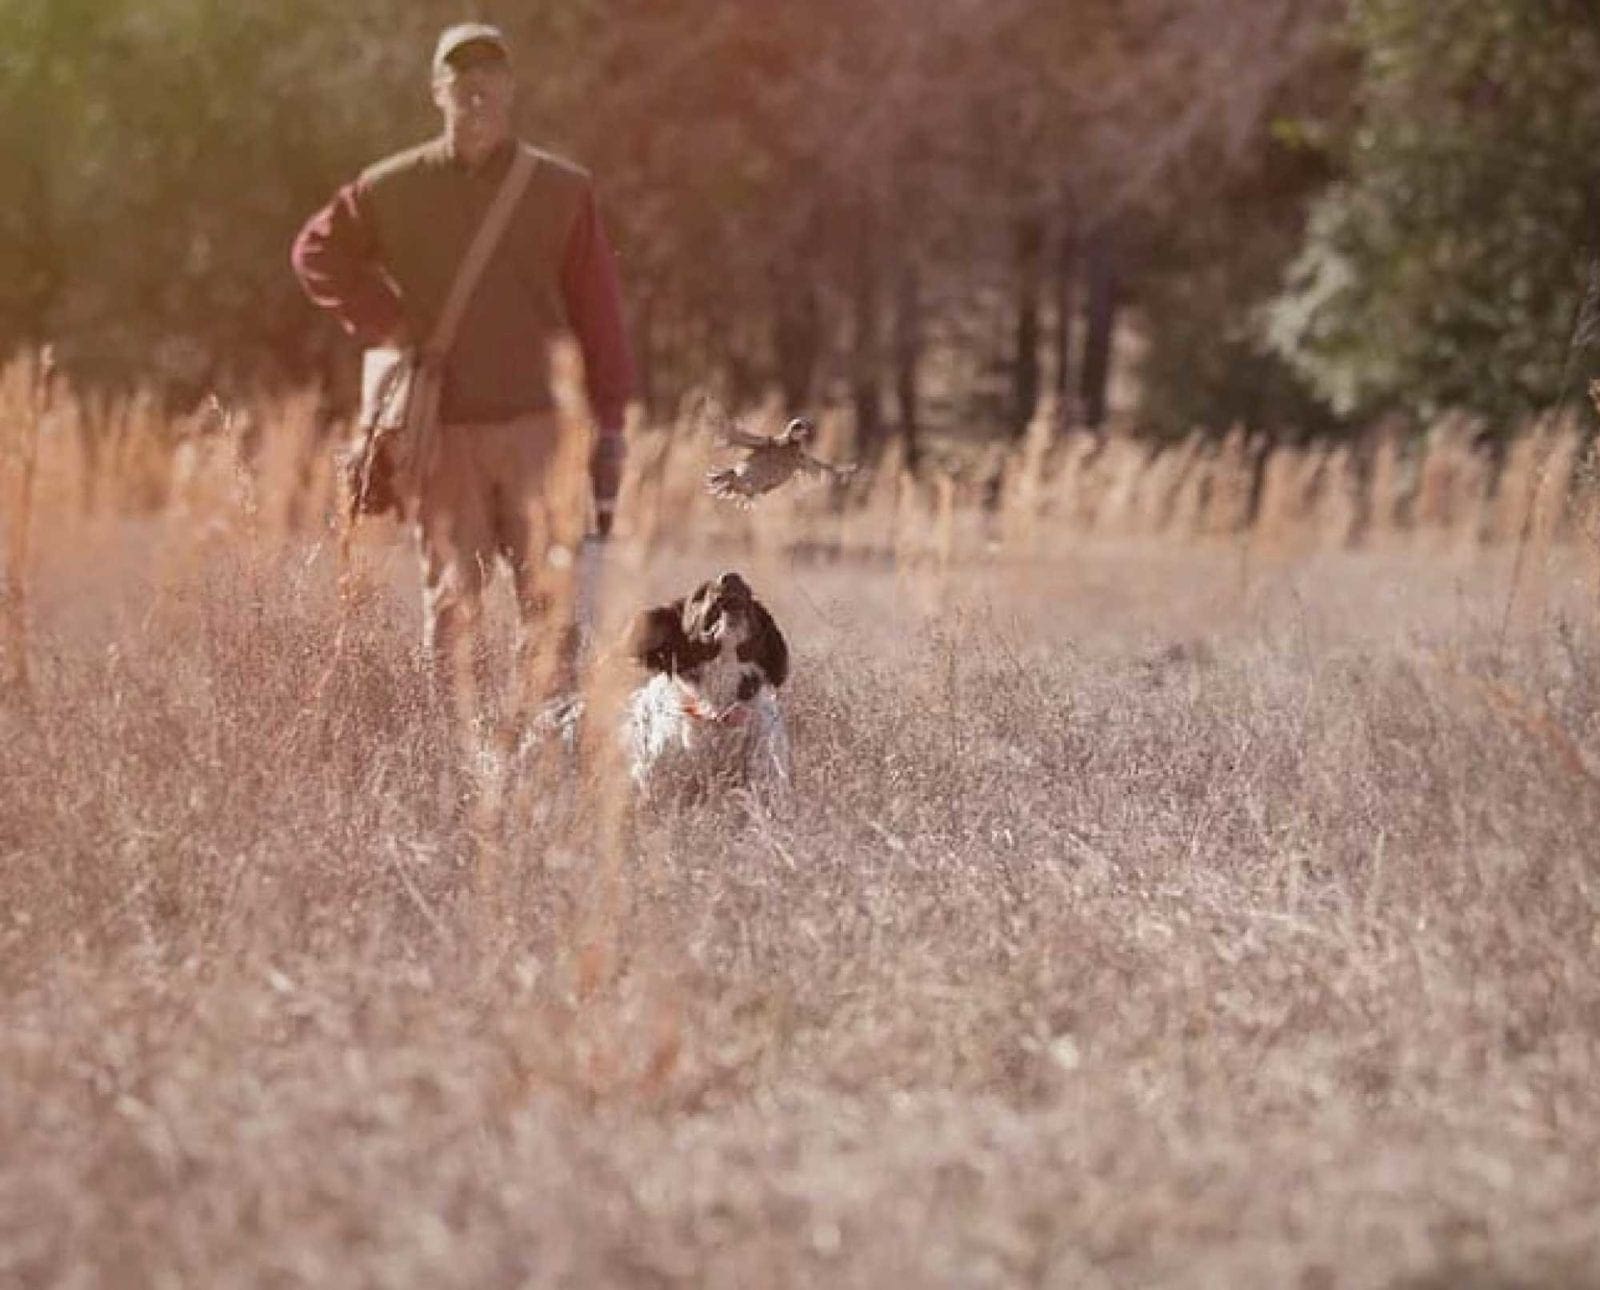 Todd Agnew trains a spaniel in a field for bird hunting.